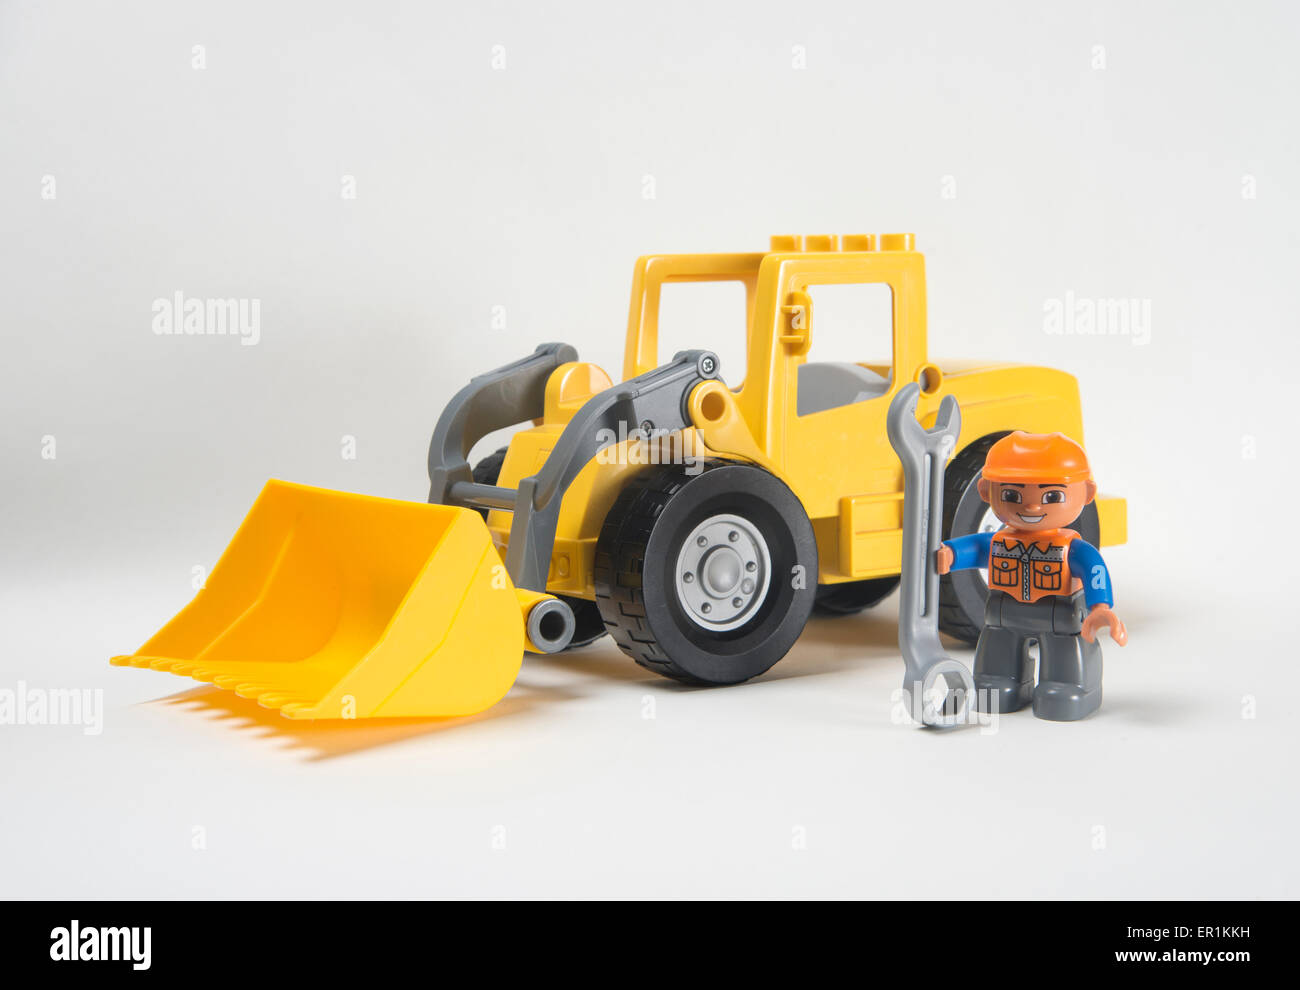 Man at work. Lego Duplo front loader digger with driver holding spanner Stock Photo